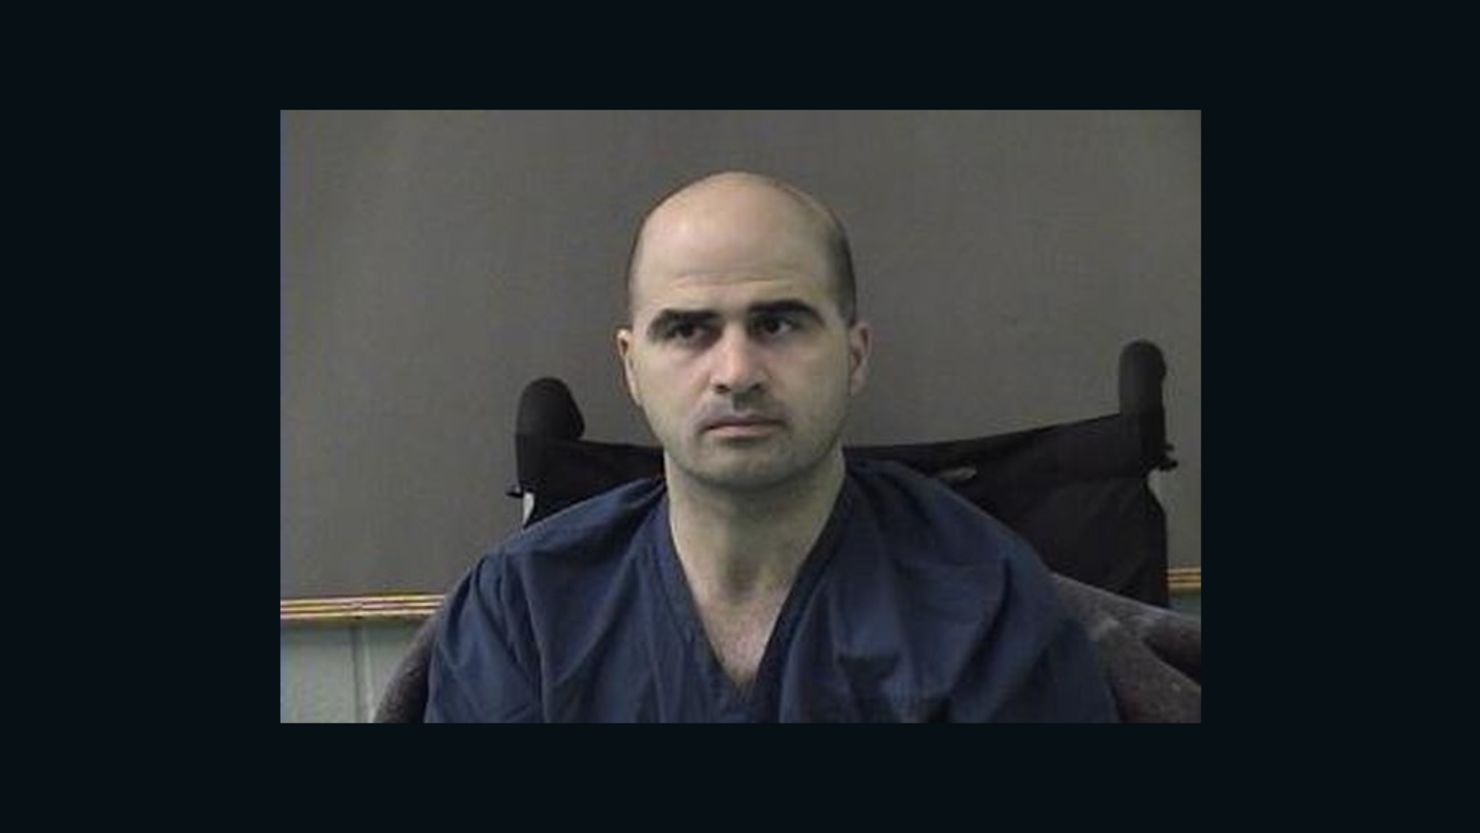 Maj. Nidal Hasan is charged with 13 counts of premeditated murder and 32 counts of attempted murder in connection with a 2009 attack at Fort Hood's processing center.